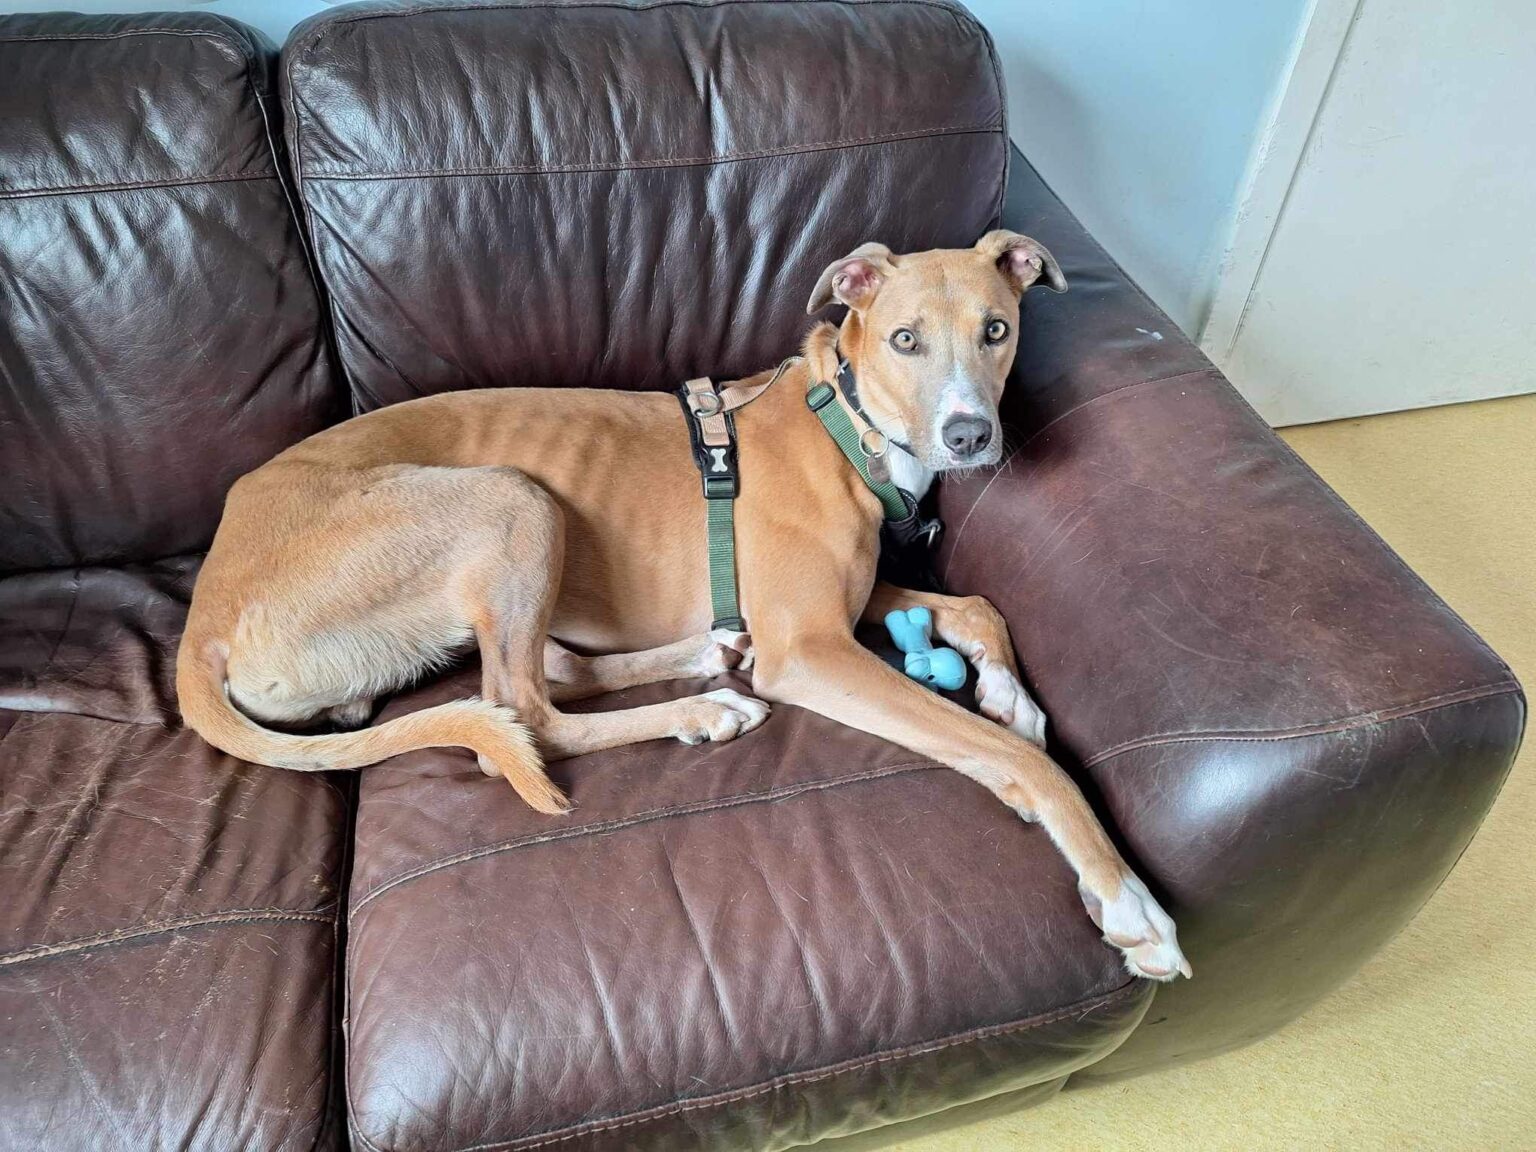 Meet Alvin, a lazy lurcher who's been in kennels for over 750 days. This affectionate couch potato needs a loving home where he can relax and be part of a family.